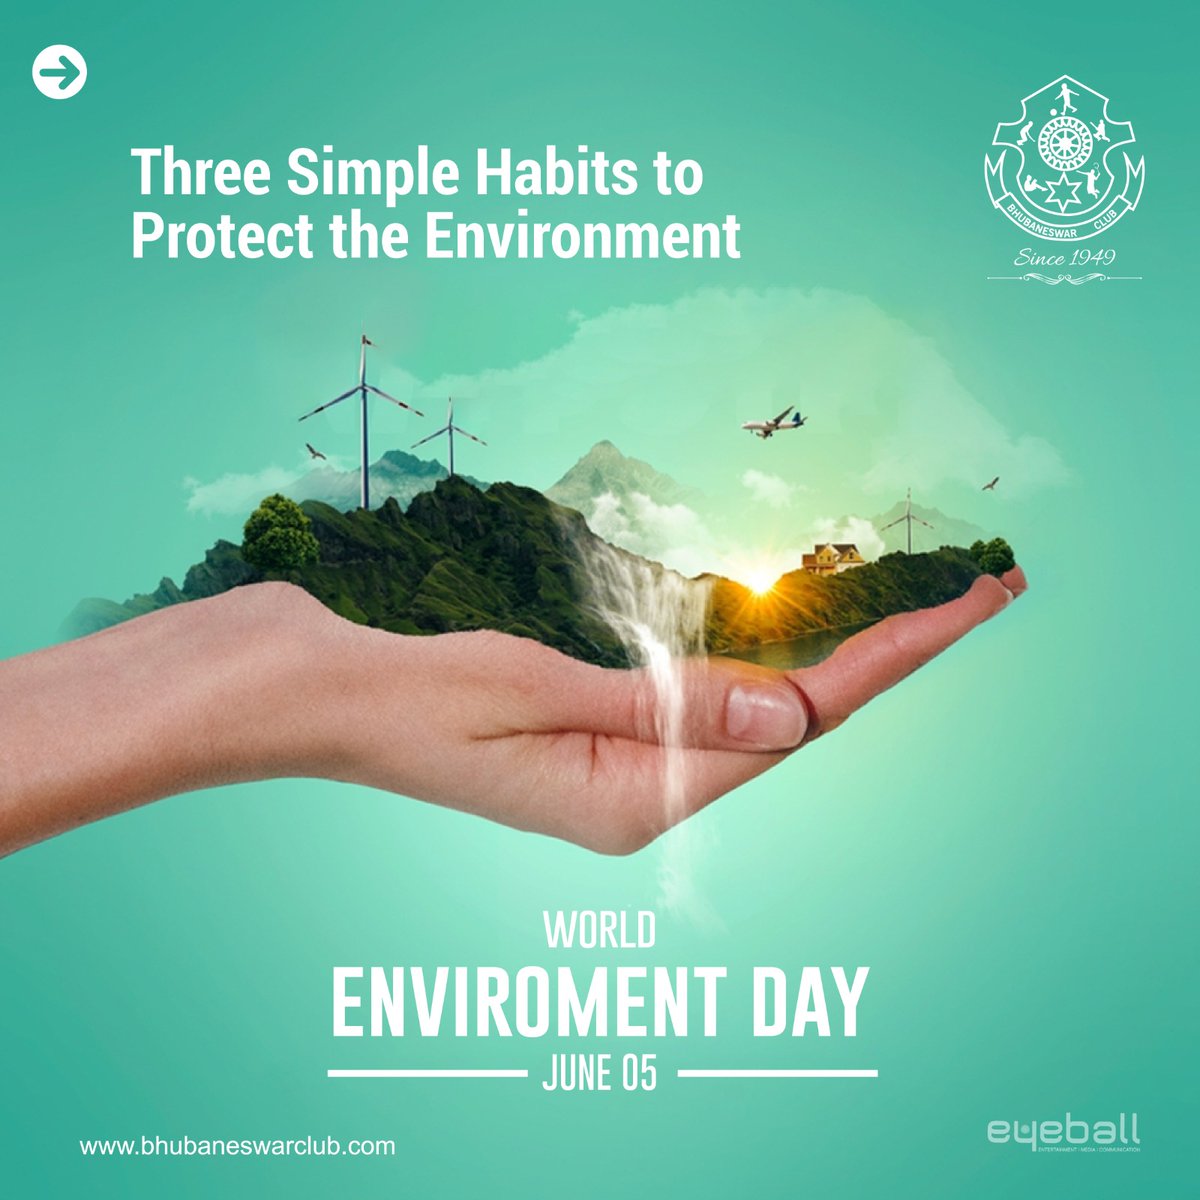 Three Simple Habits to Protect the Environment
#worldenvironmentday #greenLiving #ecofriendlytips #planttree #gopaperless #avoidplastic